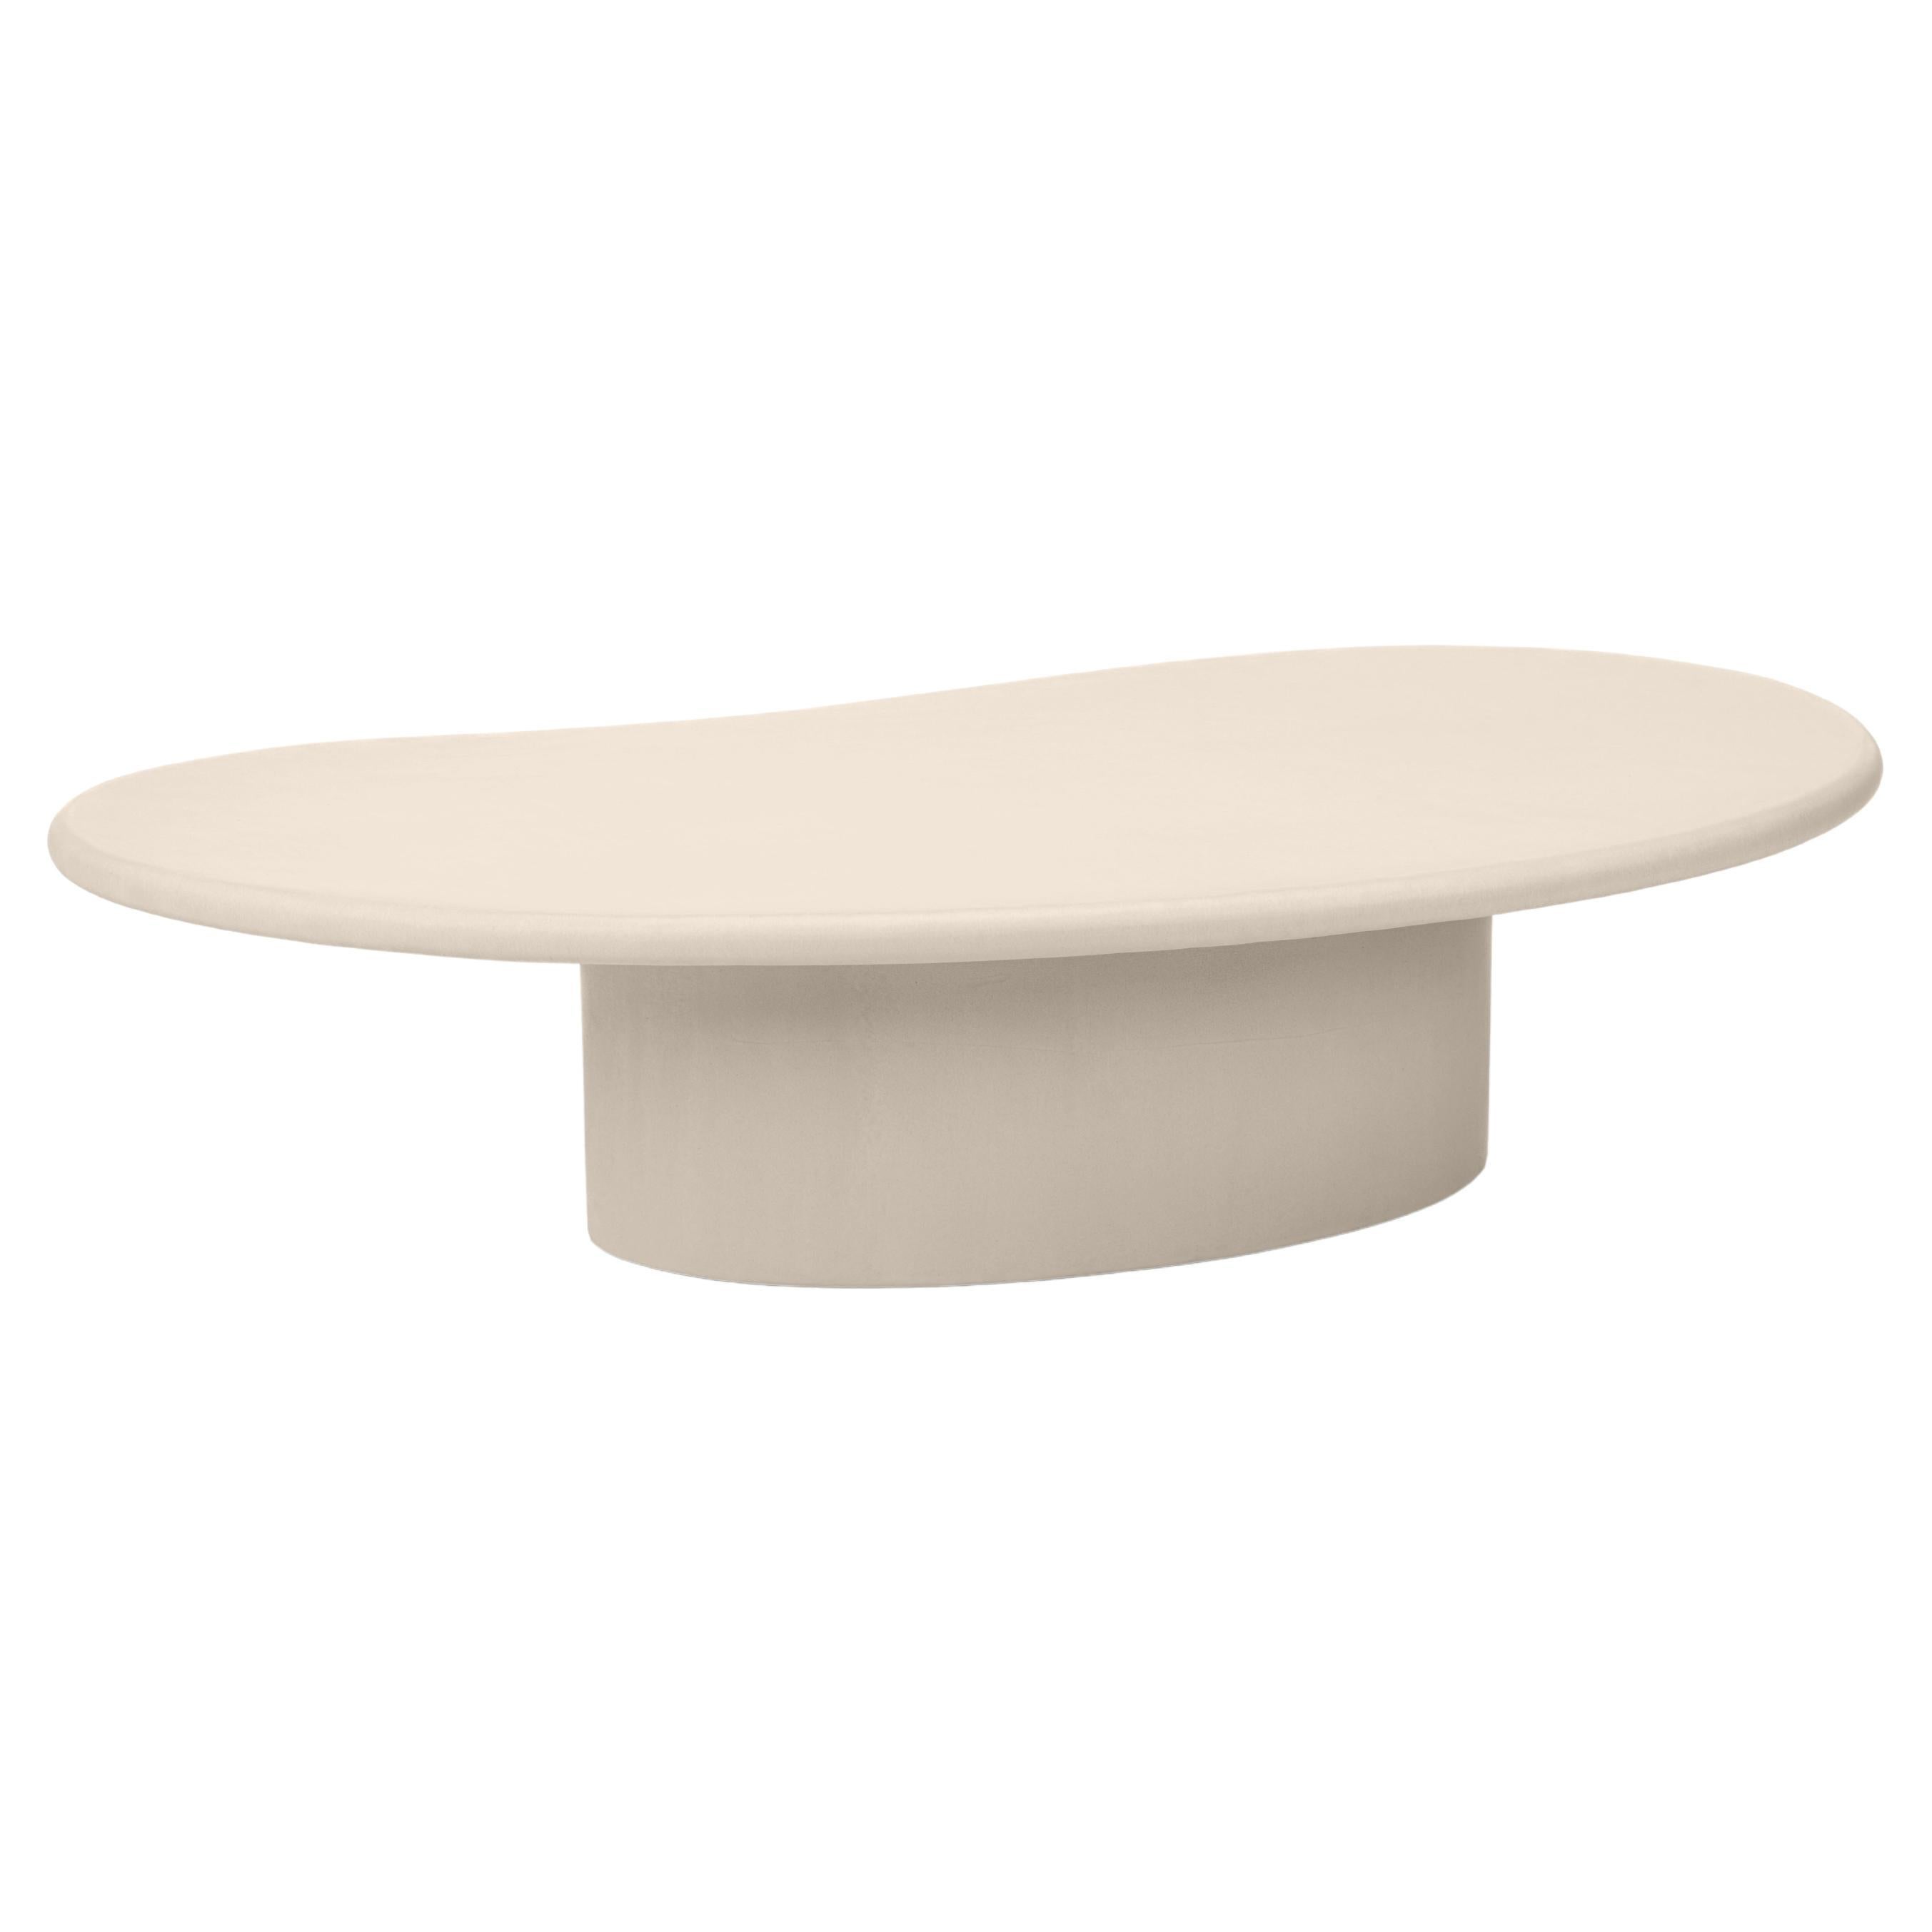 Organic Shaped Natural Plaster Coffee Table "Angus" 130 by Isabelle Beaumont For Sale